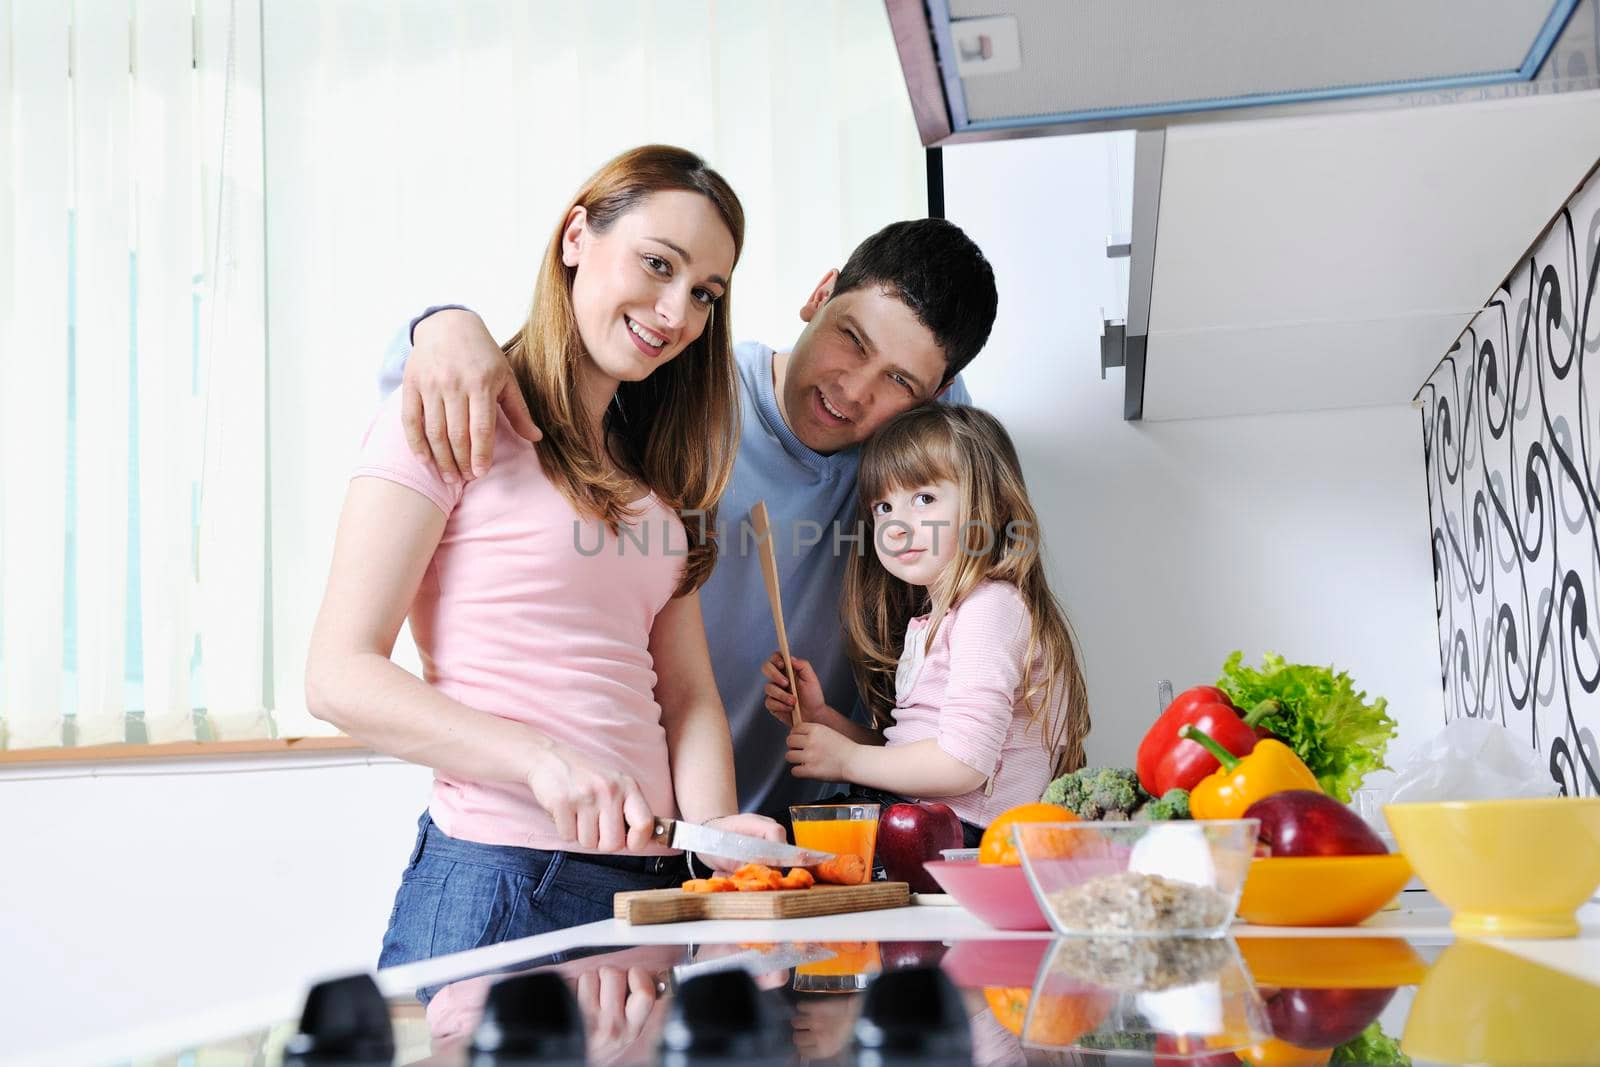 happy young family have lunch time with fresh fruits and vegetable food in bright kitchen 